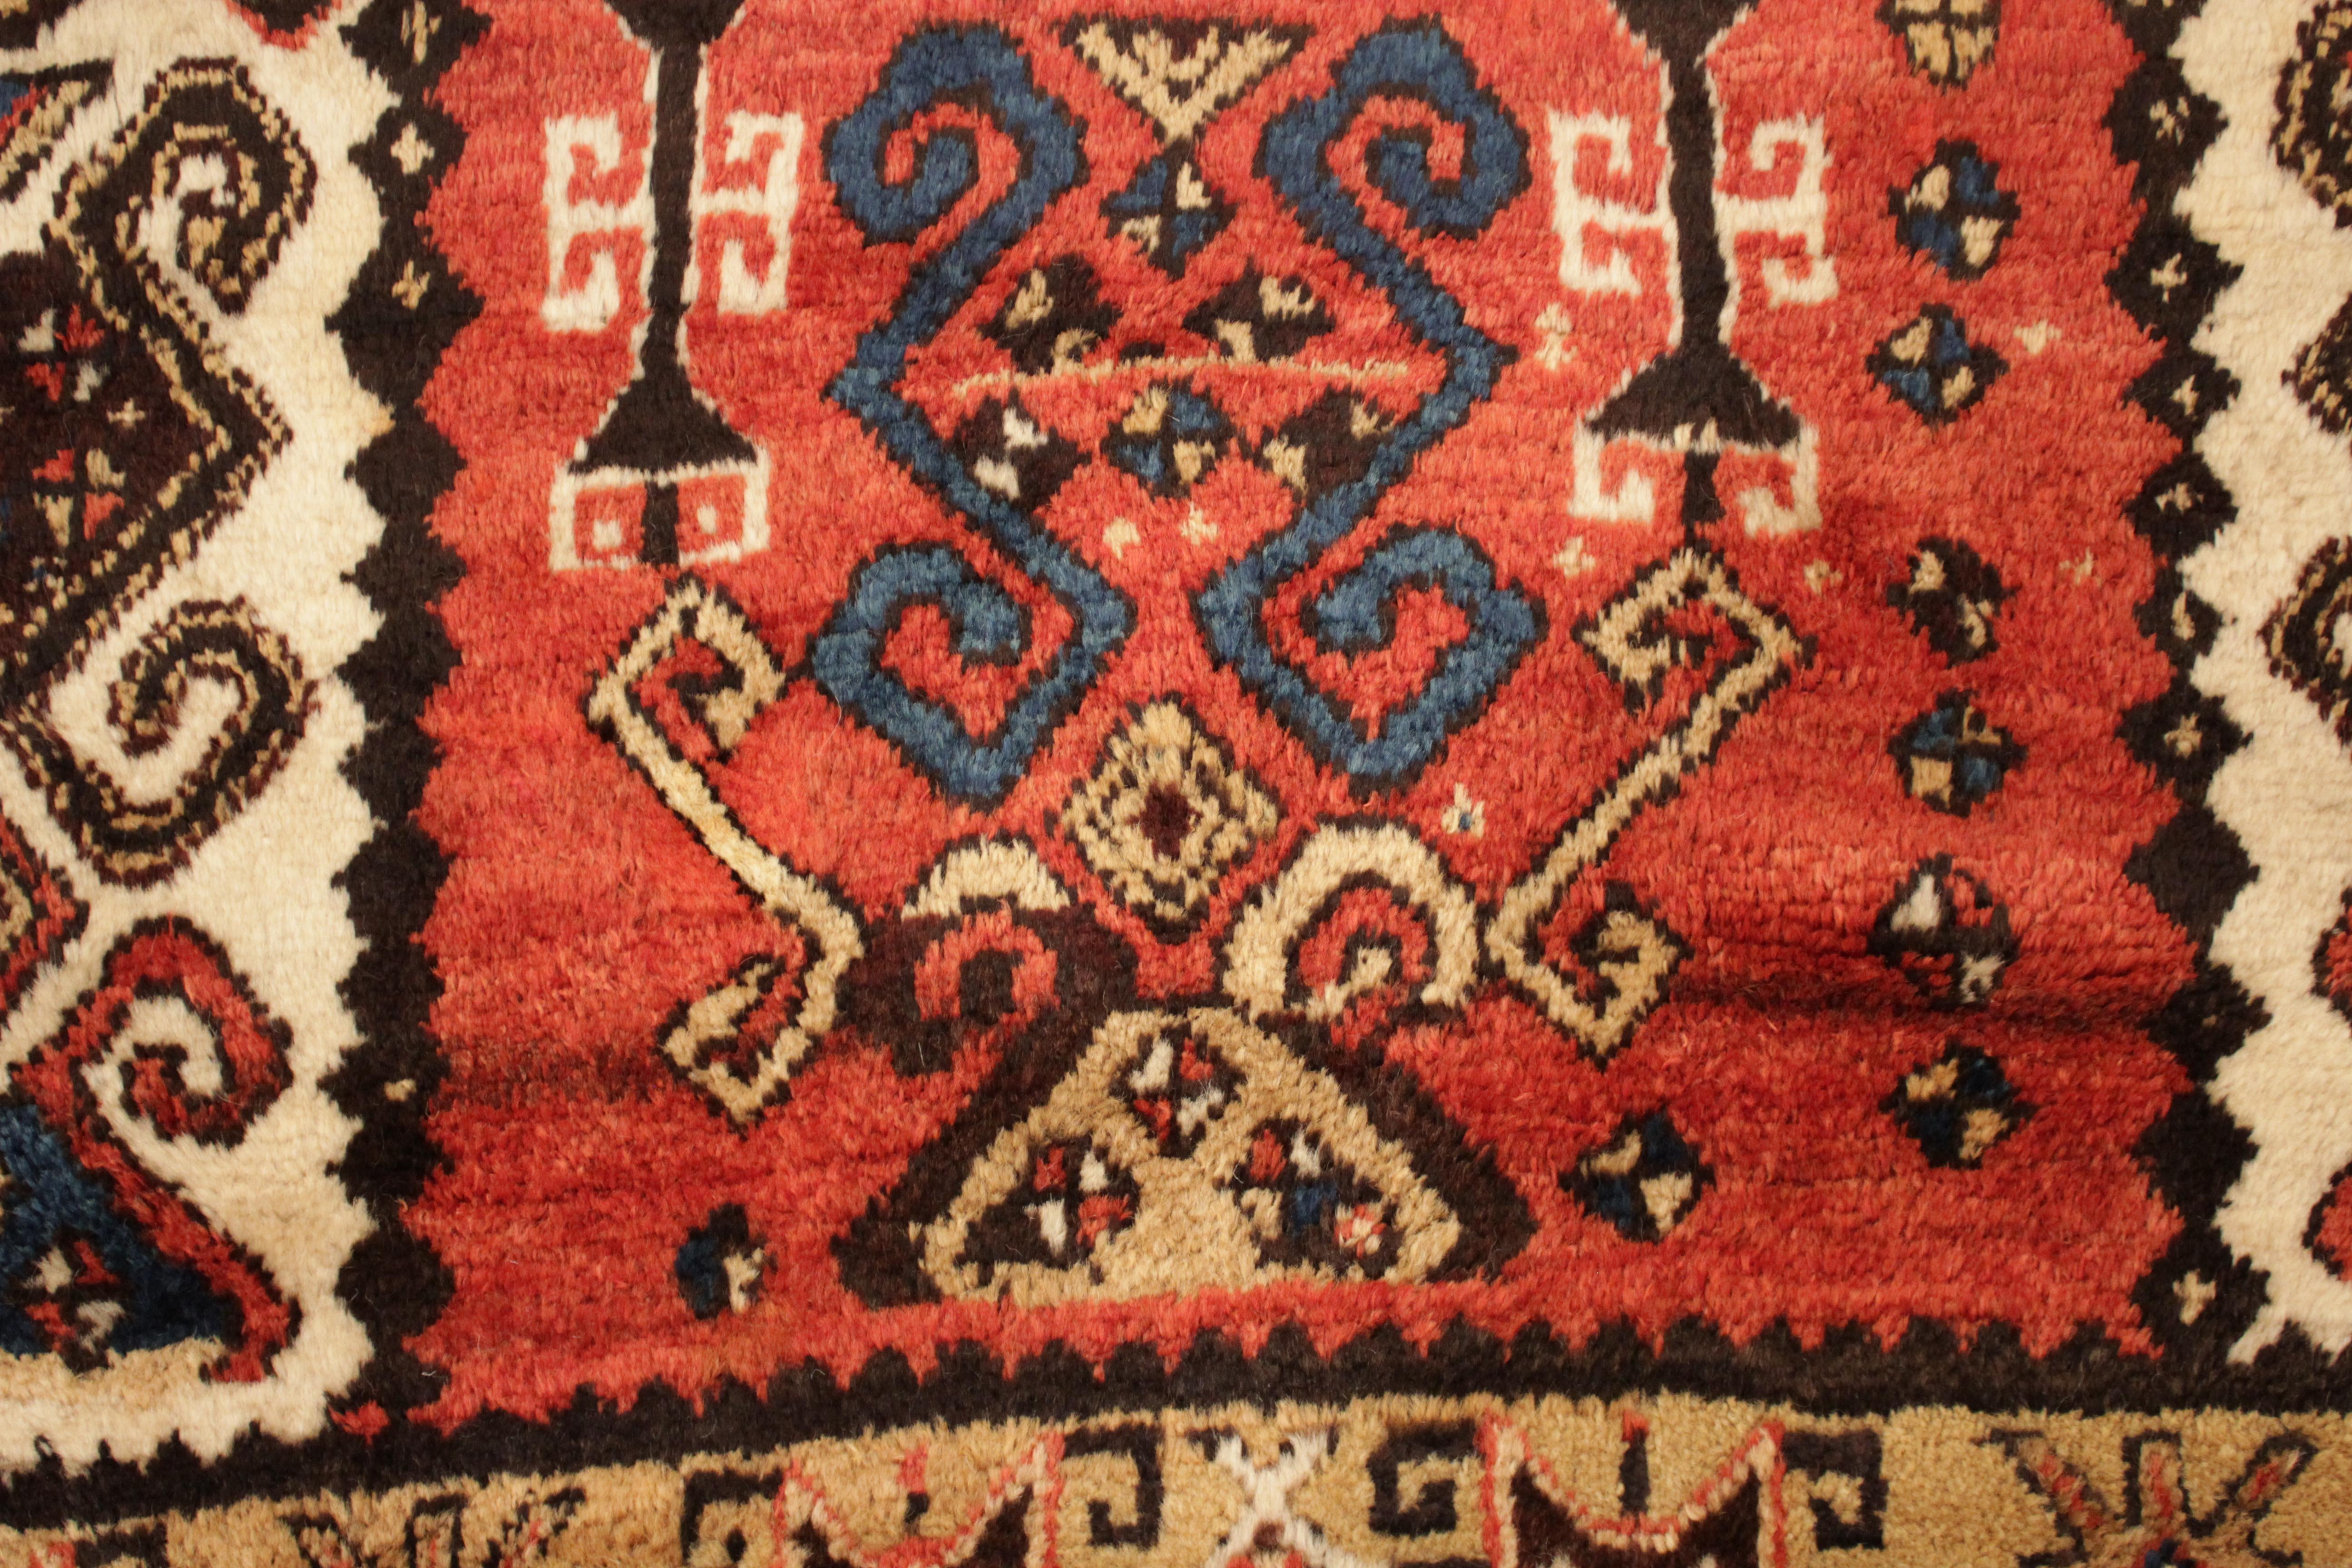 The group of weavings known as Zakatala has been been discovered only in recent times by the rug world. The fall of the Soviet Russia has meant an opening of frontiers which enabled the appearance in the West of previously unknown types, which until